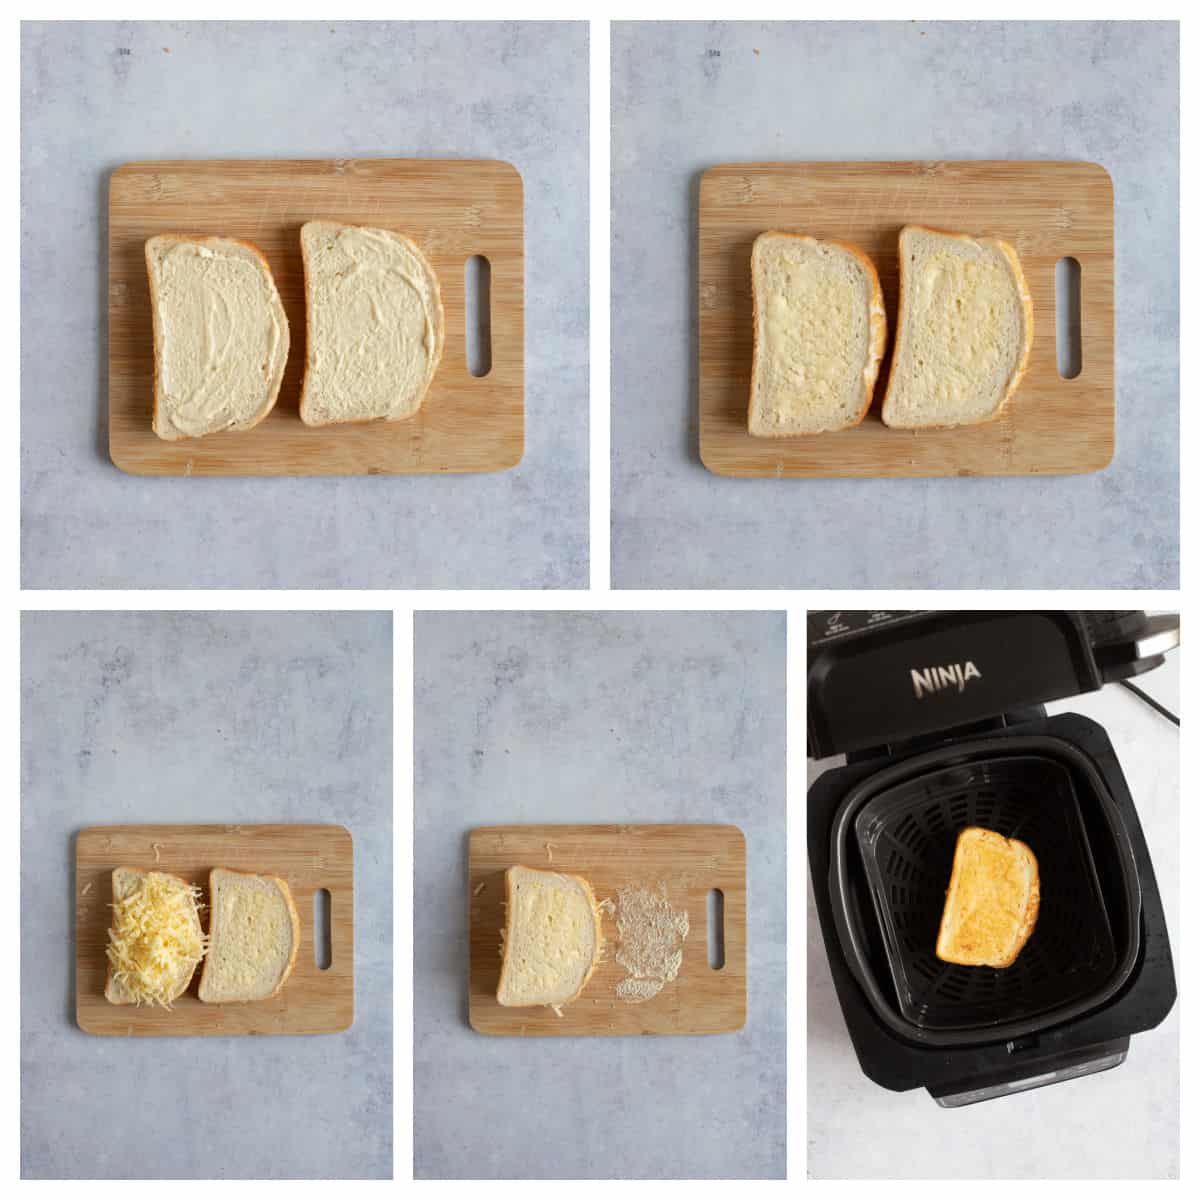 Step by step photo instructions for making a cheese toastie in an air fryer.